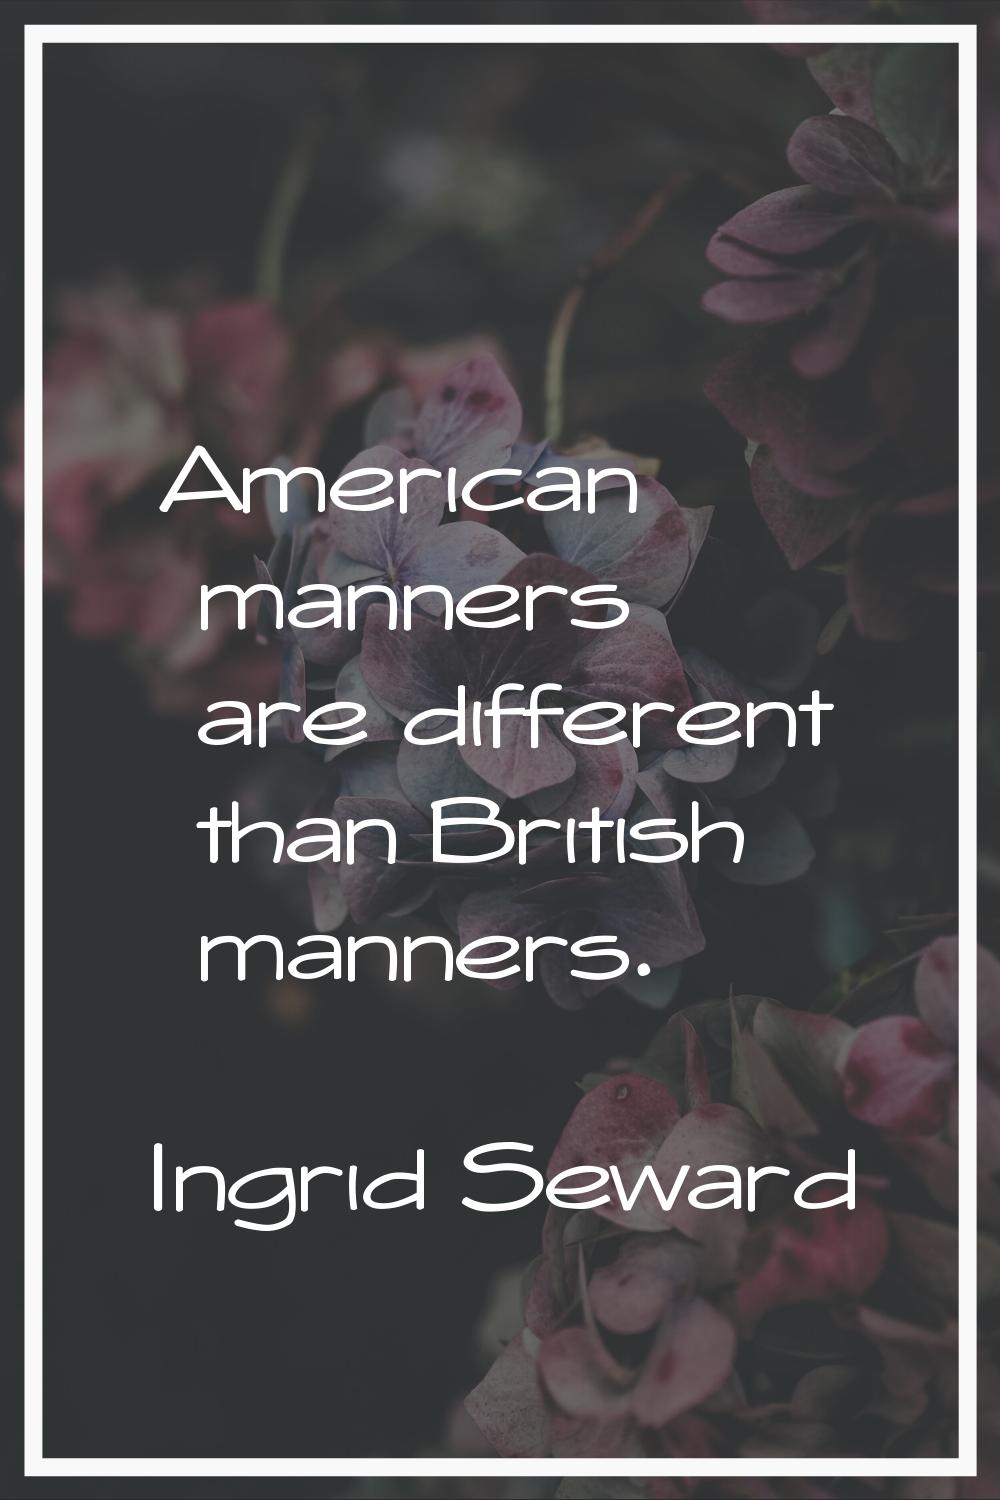 American manners are different than British manners.